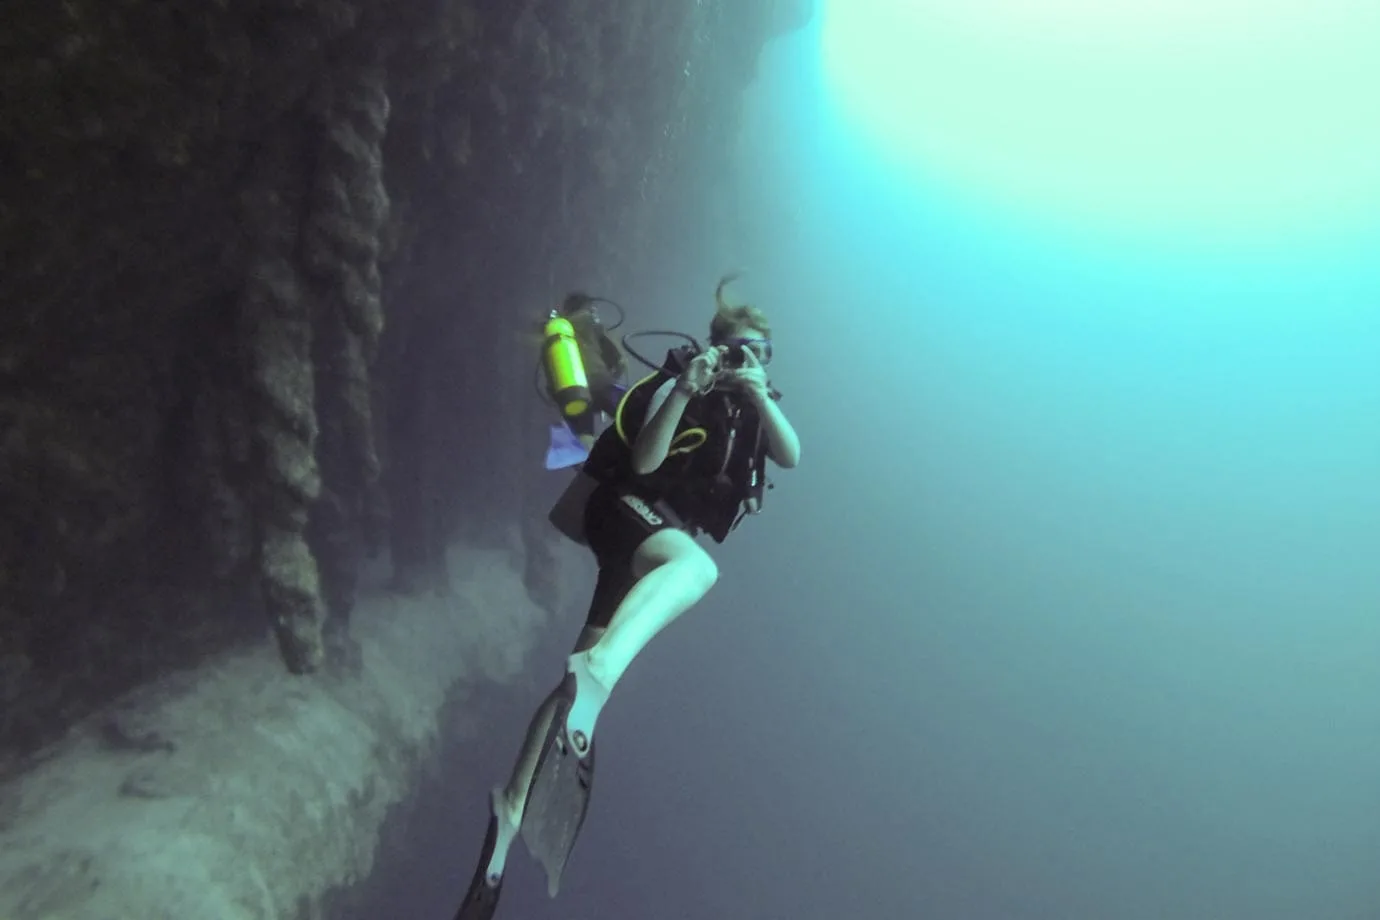 Where else in the world can you swim in and out of stalactites in murky blue water?